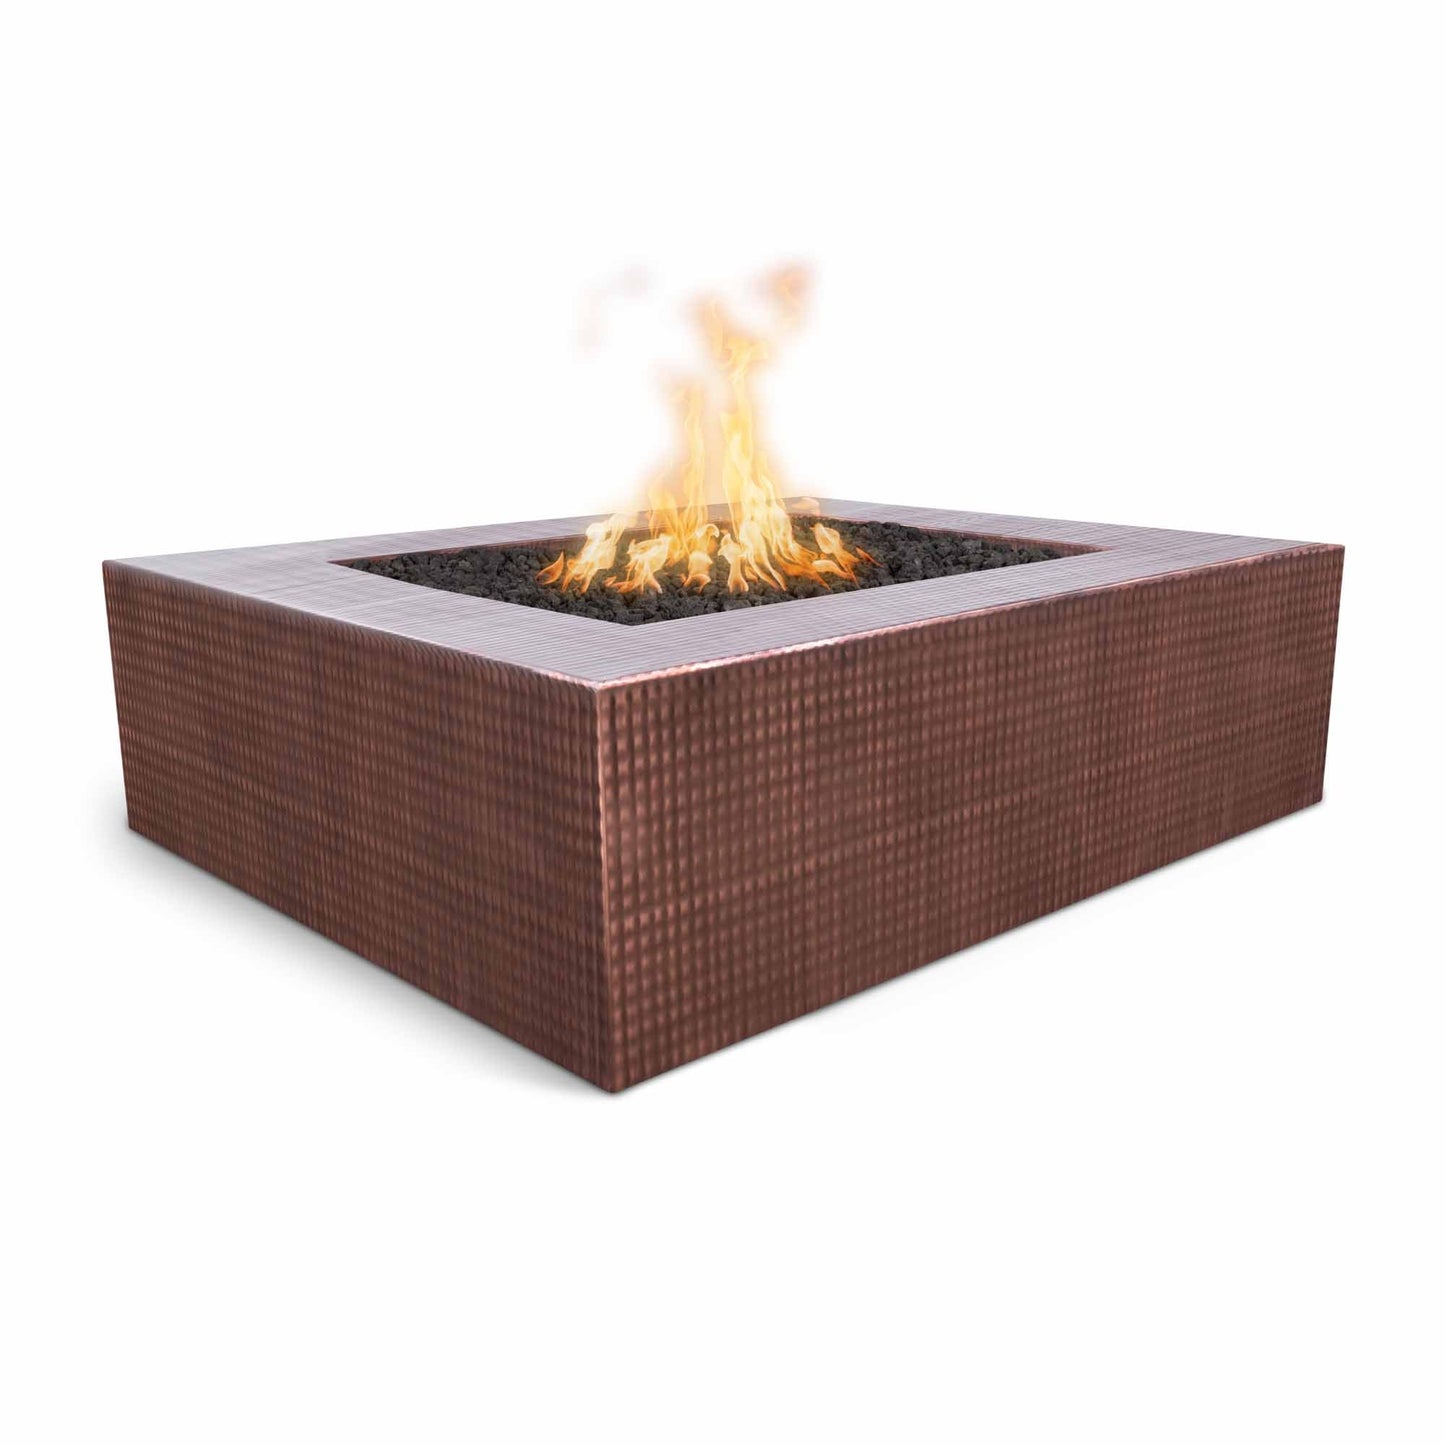 The Outdoor Plus Square Quad 42" Hammered Copper Natural Gas Fire Pit with Match Lit Ignition